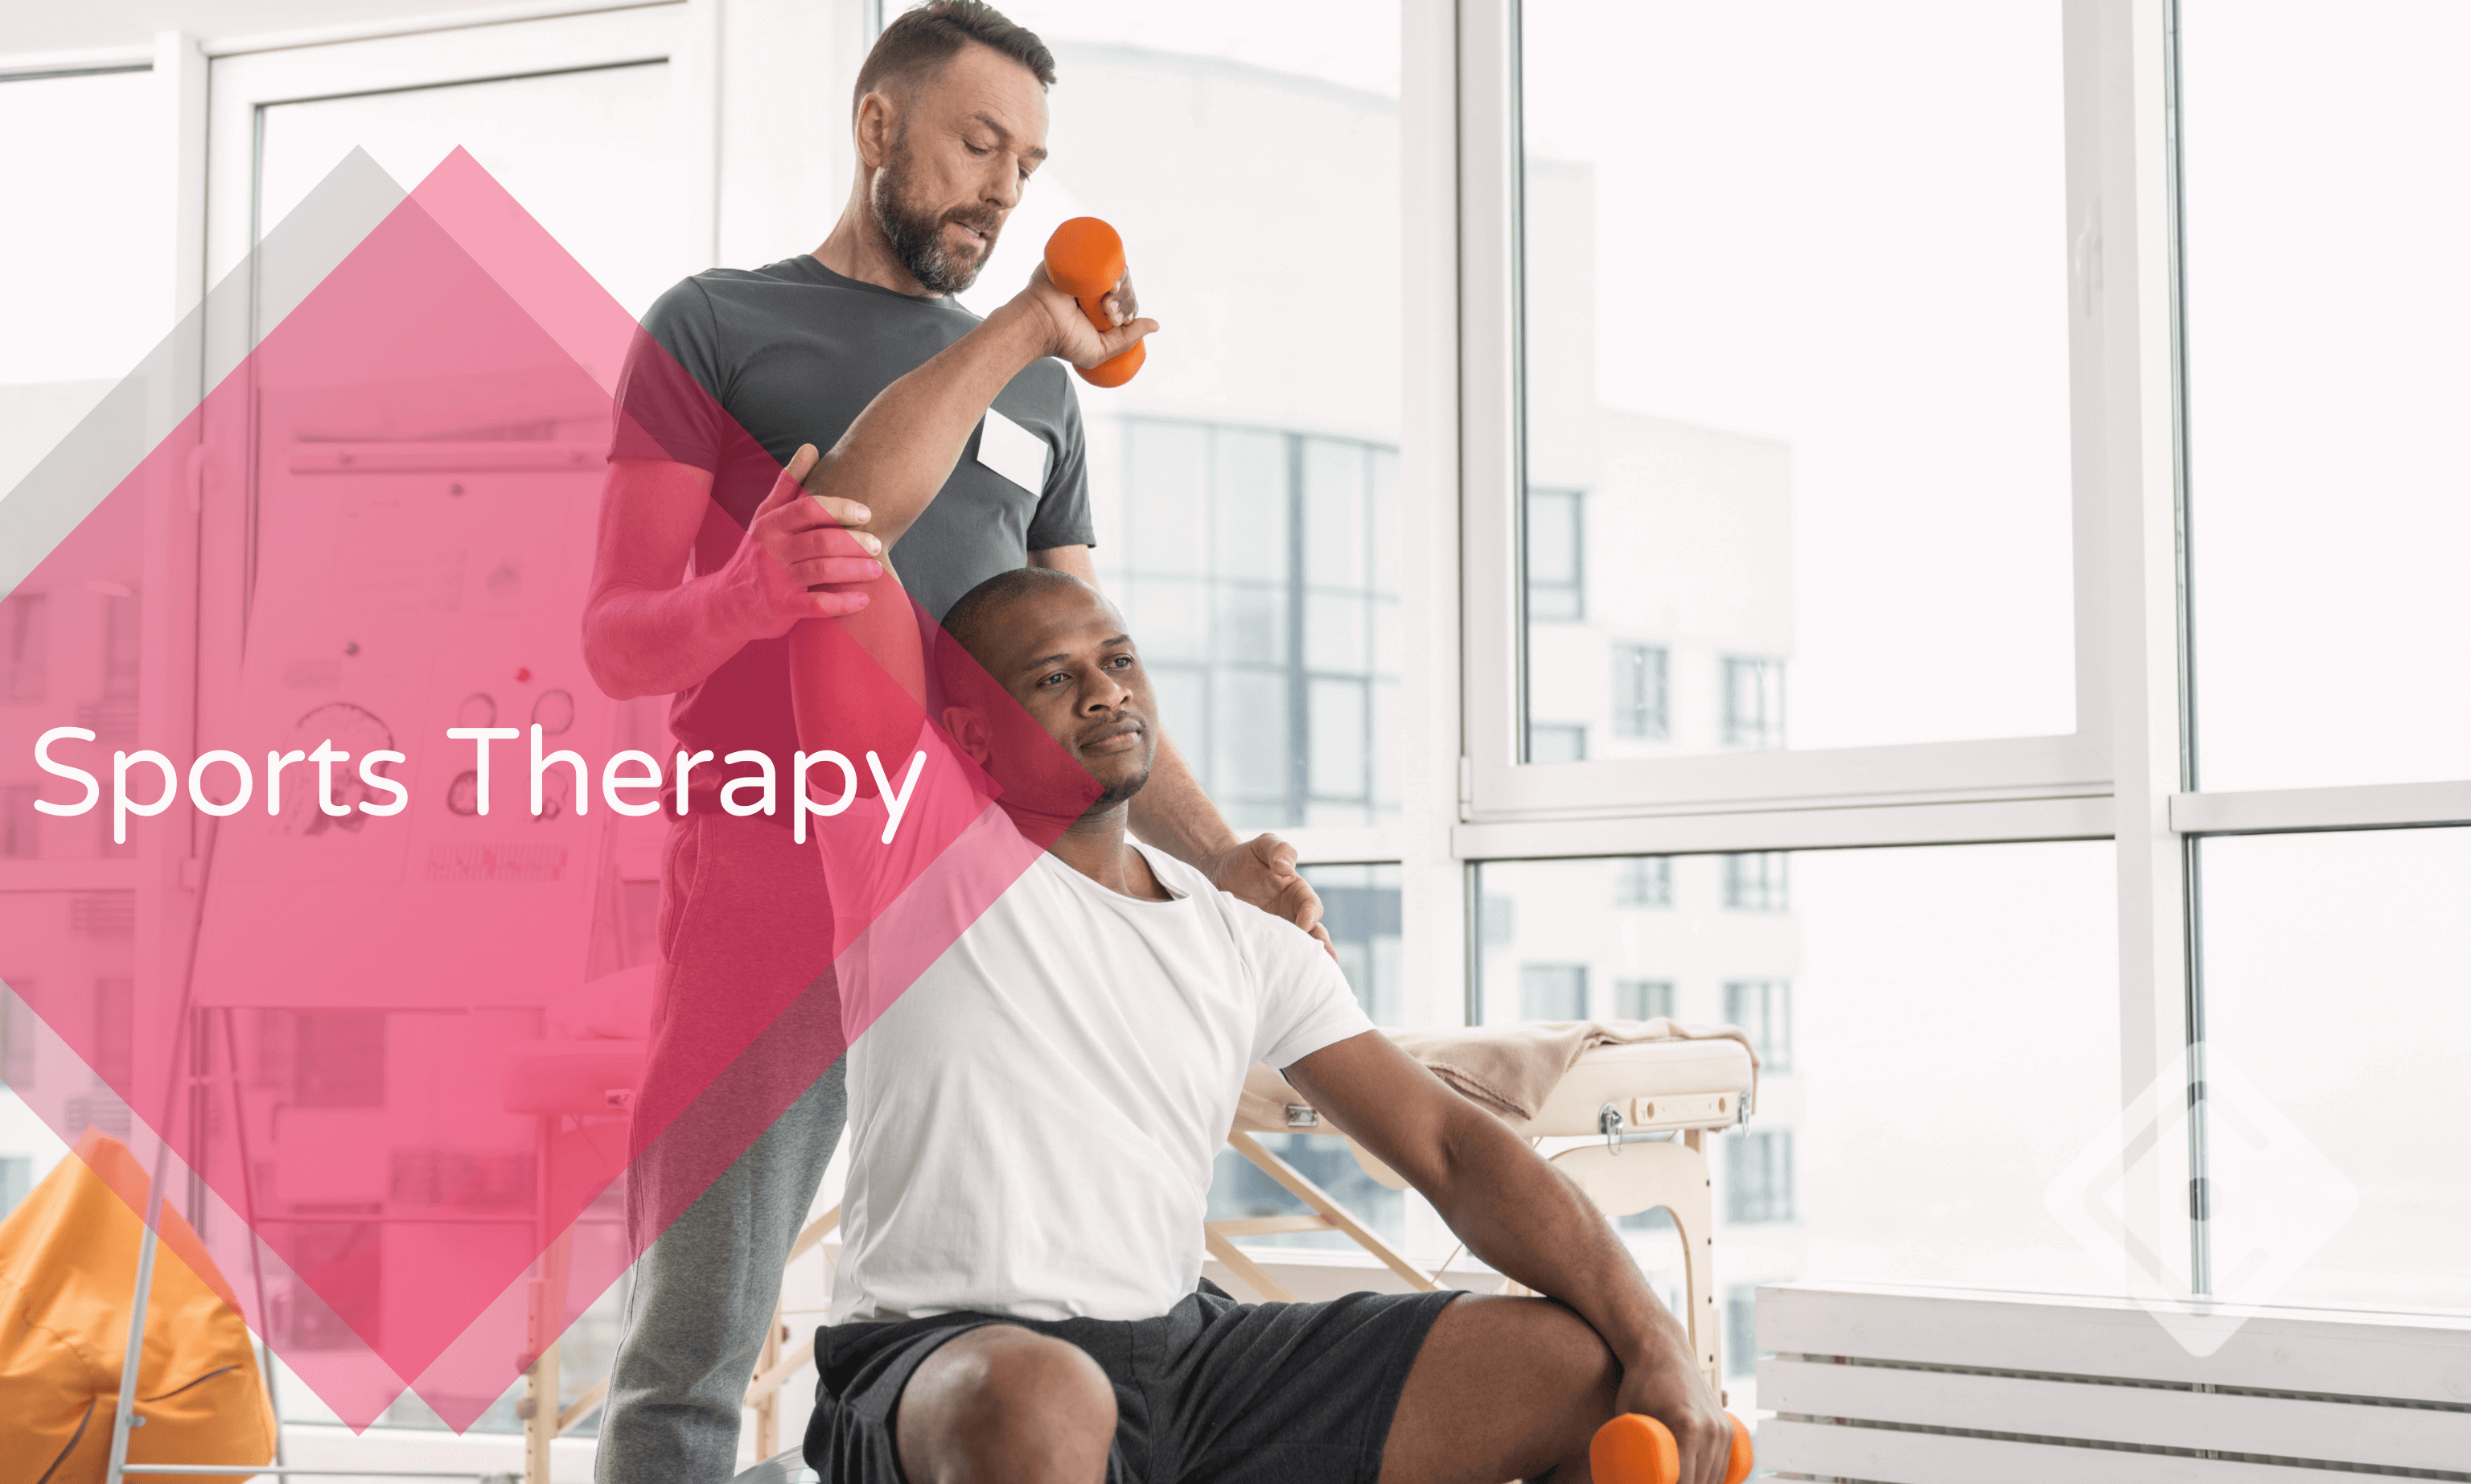 Sports Therapy